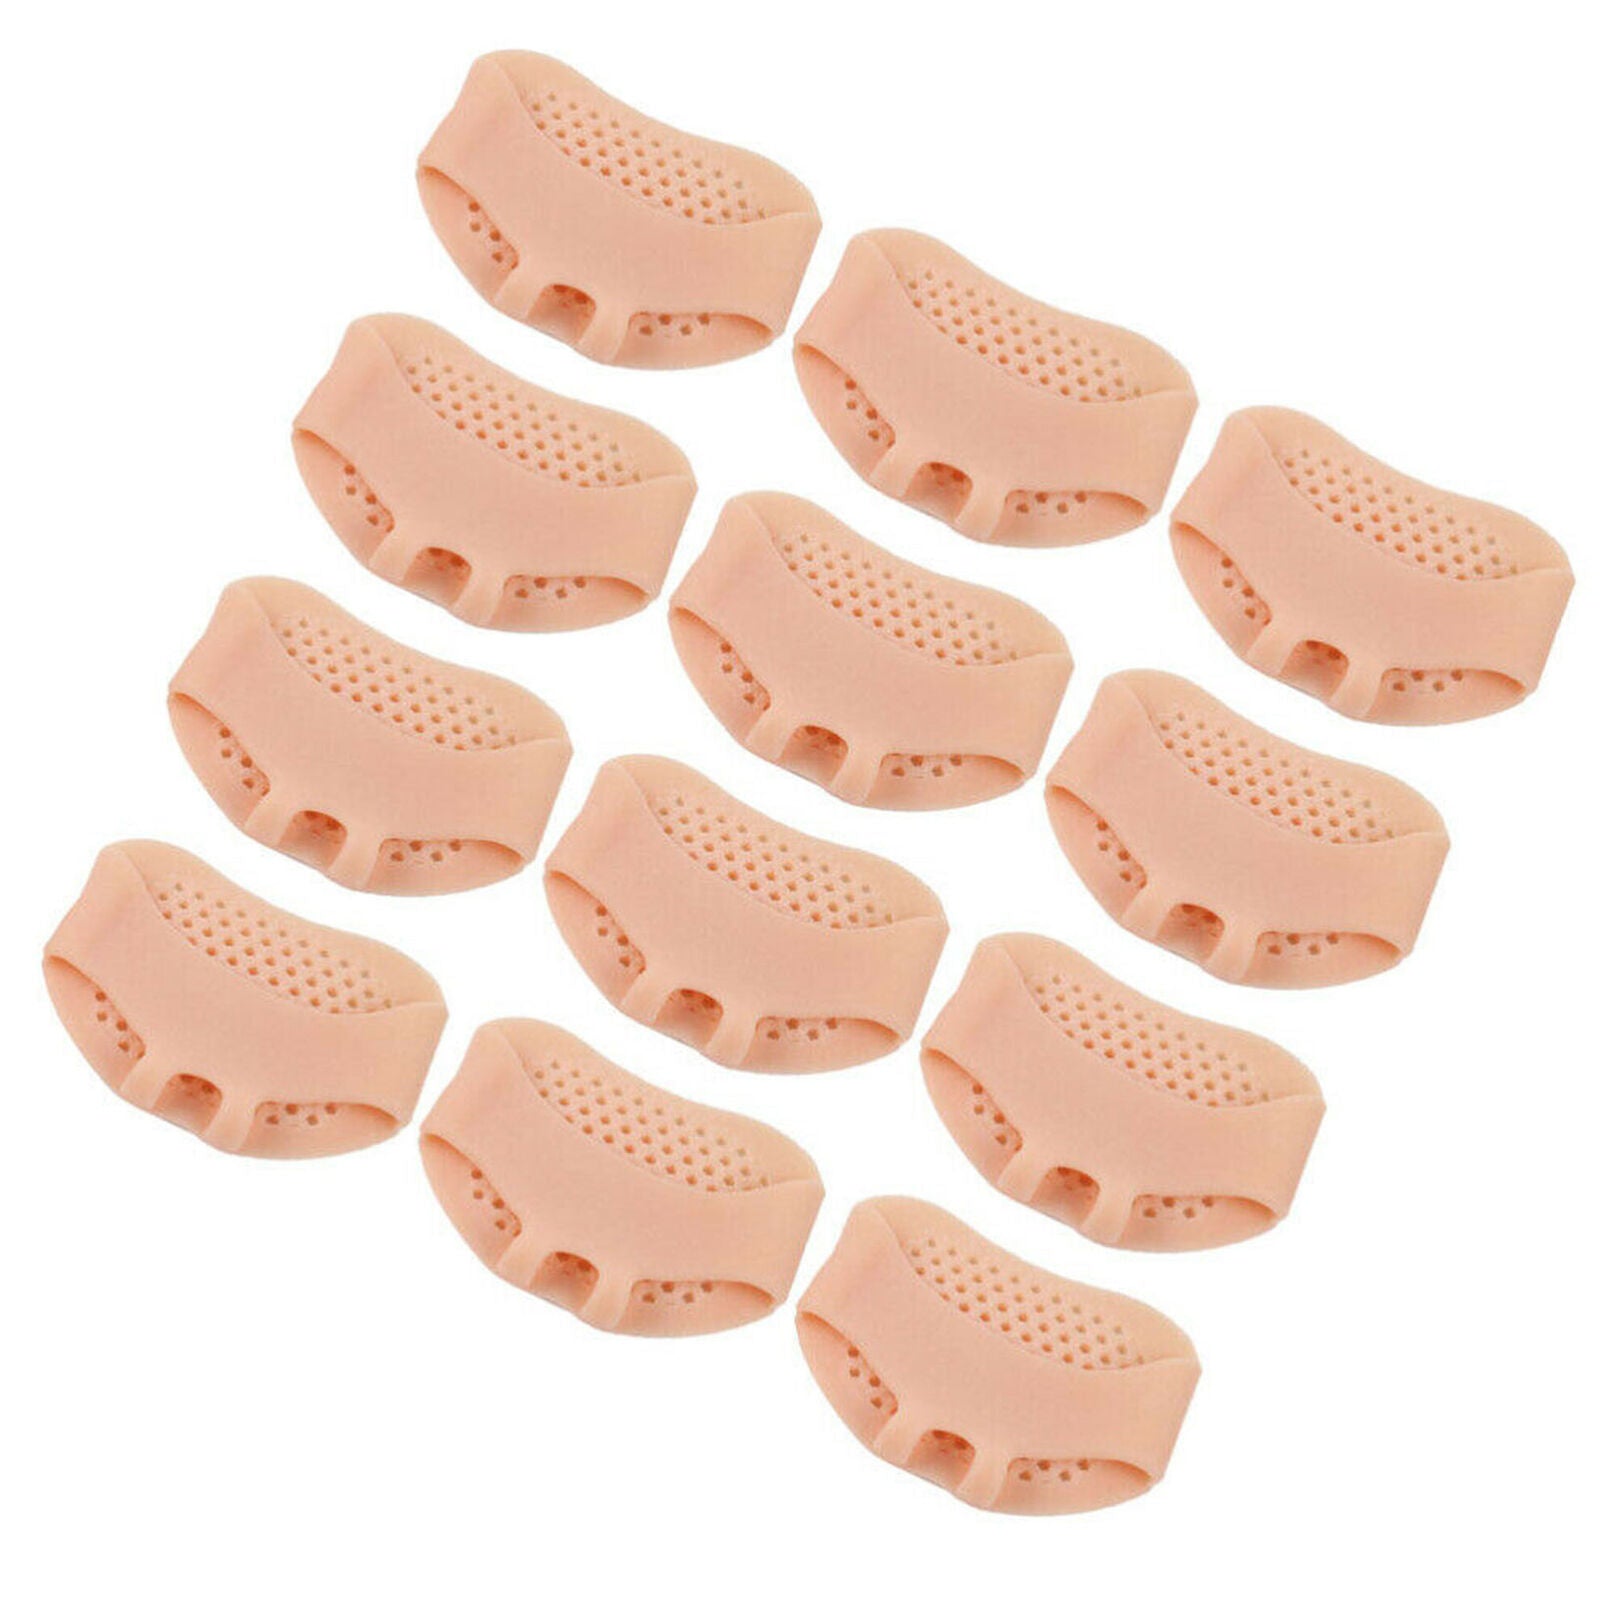 6 pair Gel Metatarsal Sore Ball Foot Pain Relief Cushion Pads Forefoot Insole